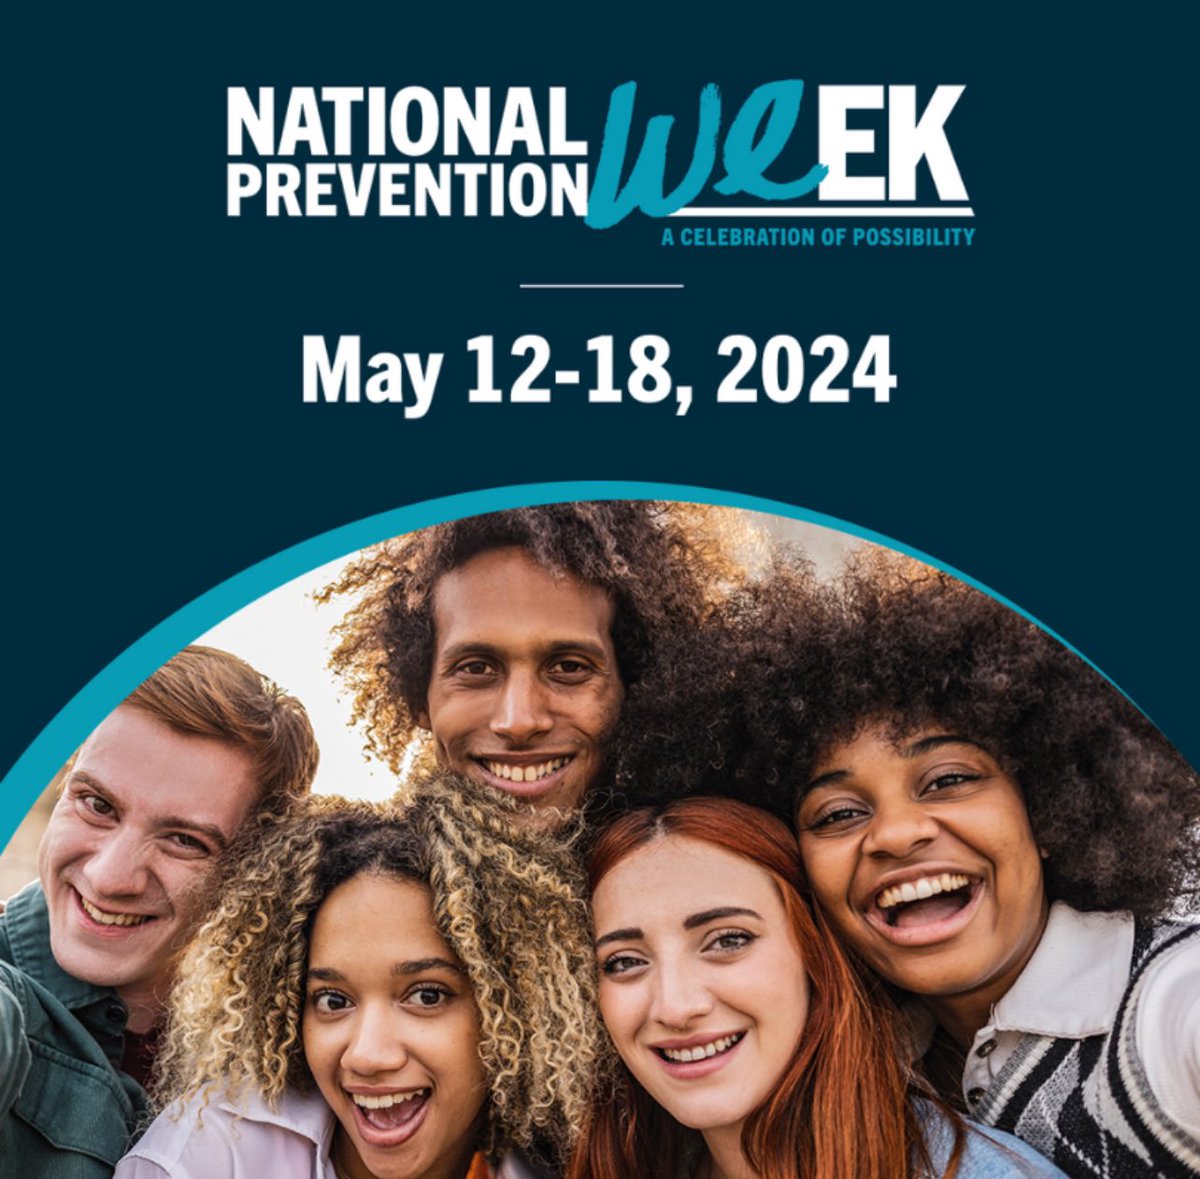 Over 1 in 4 adults with a serious #mentalhealth problem also have a substance use issue💊. #NationalPreventionWeek24 is highlighting the nationwide efforts & initiatives to prevent #substanceuse and promote mental health🧠💪. Visit: samhsa.gov/prevention-week @samhsagov